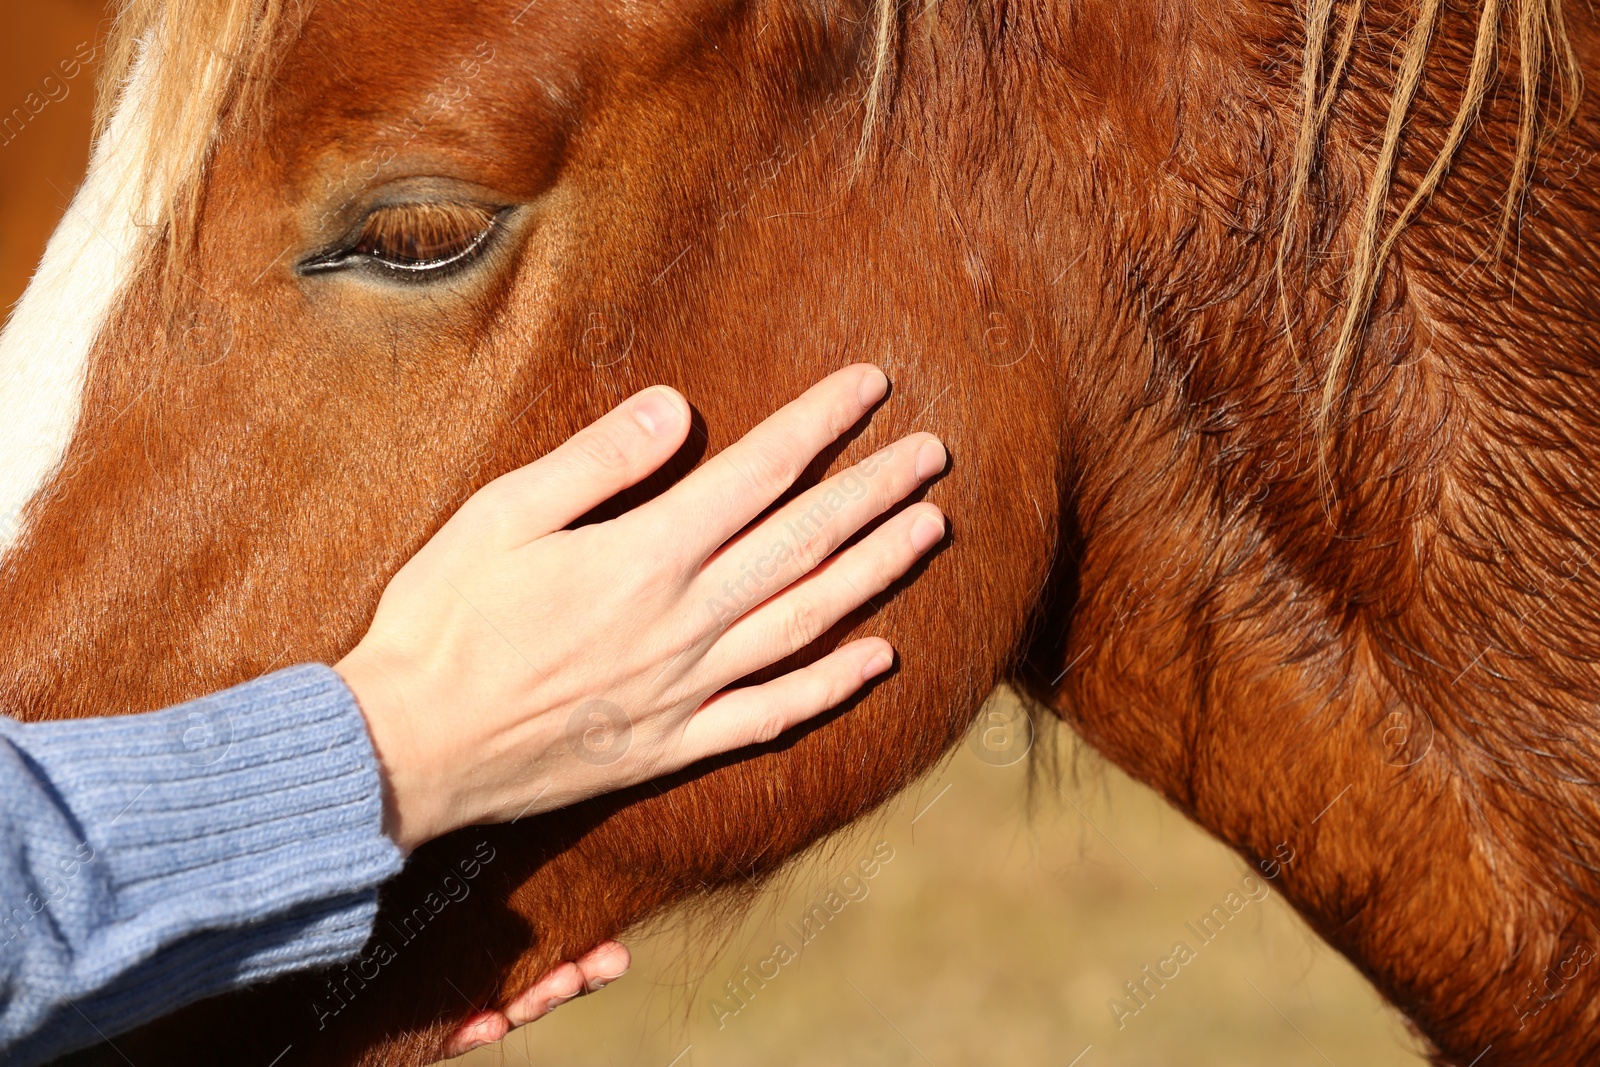 Photo of Woman petting beautiful horse outdoors on sunny day, closeup